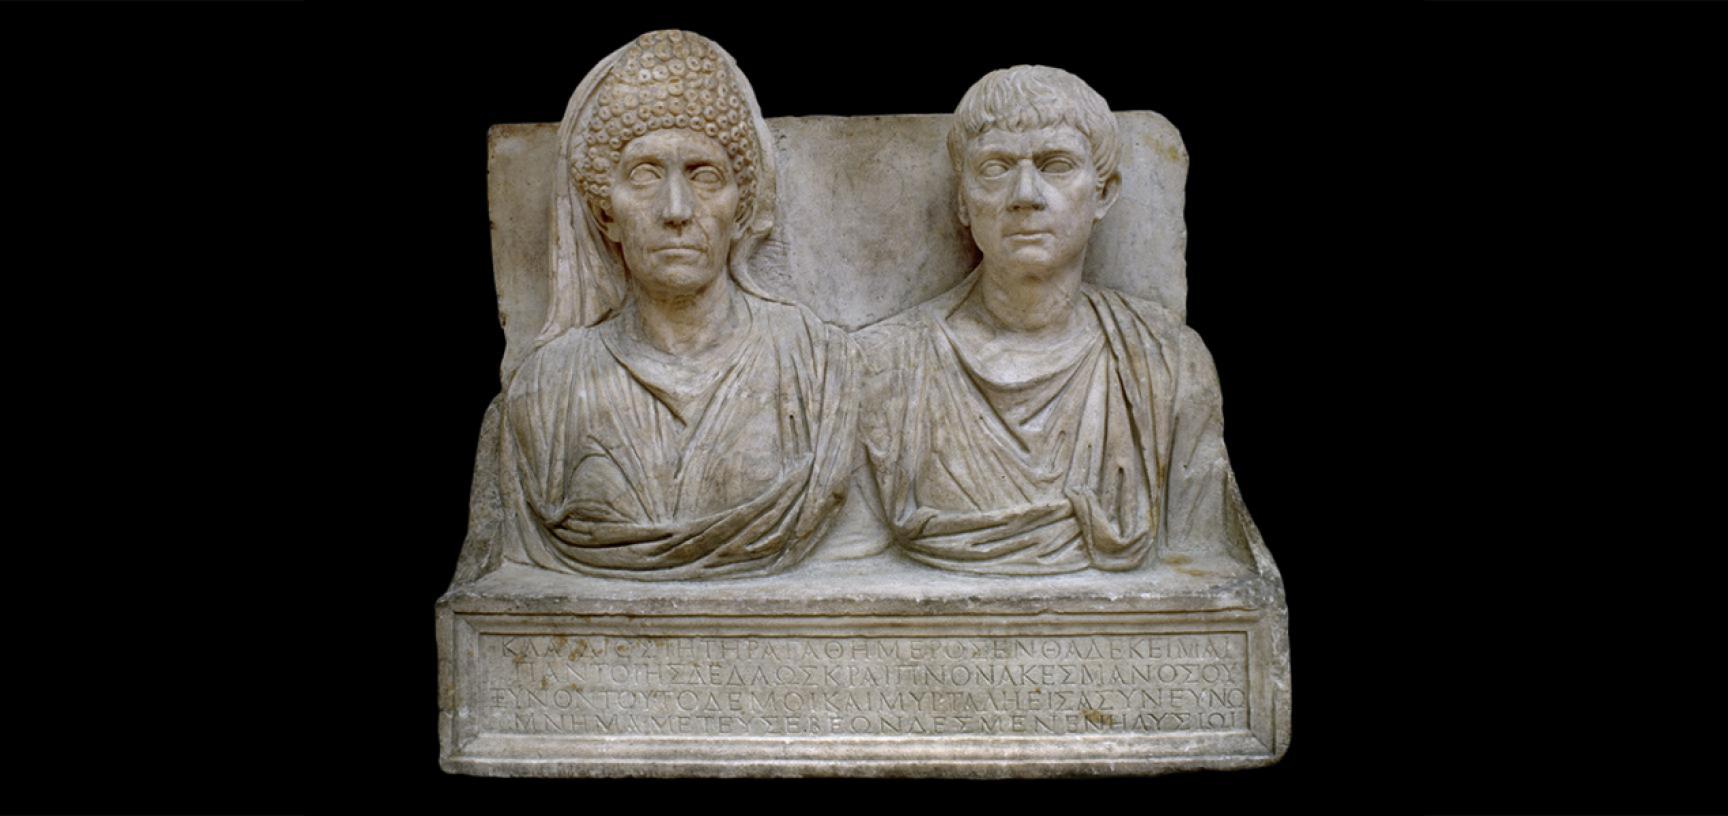 TOMBSTONE OF CLAUDIUS AGATHEMERUS AND MYRTALE from the Ashmolean collections